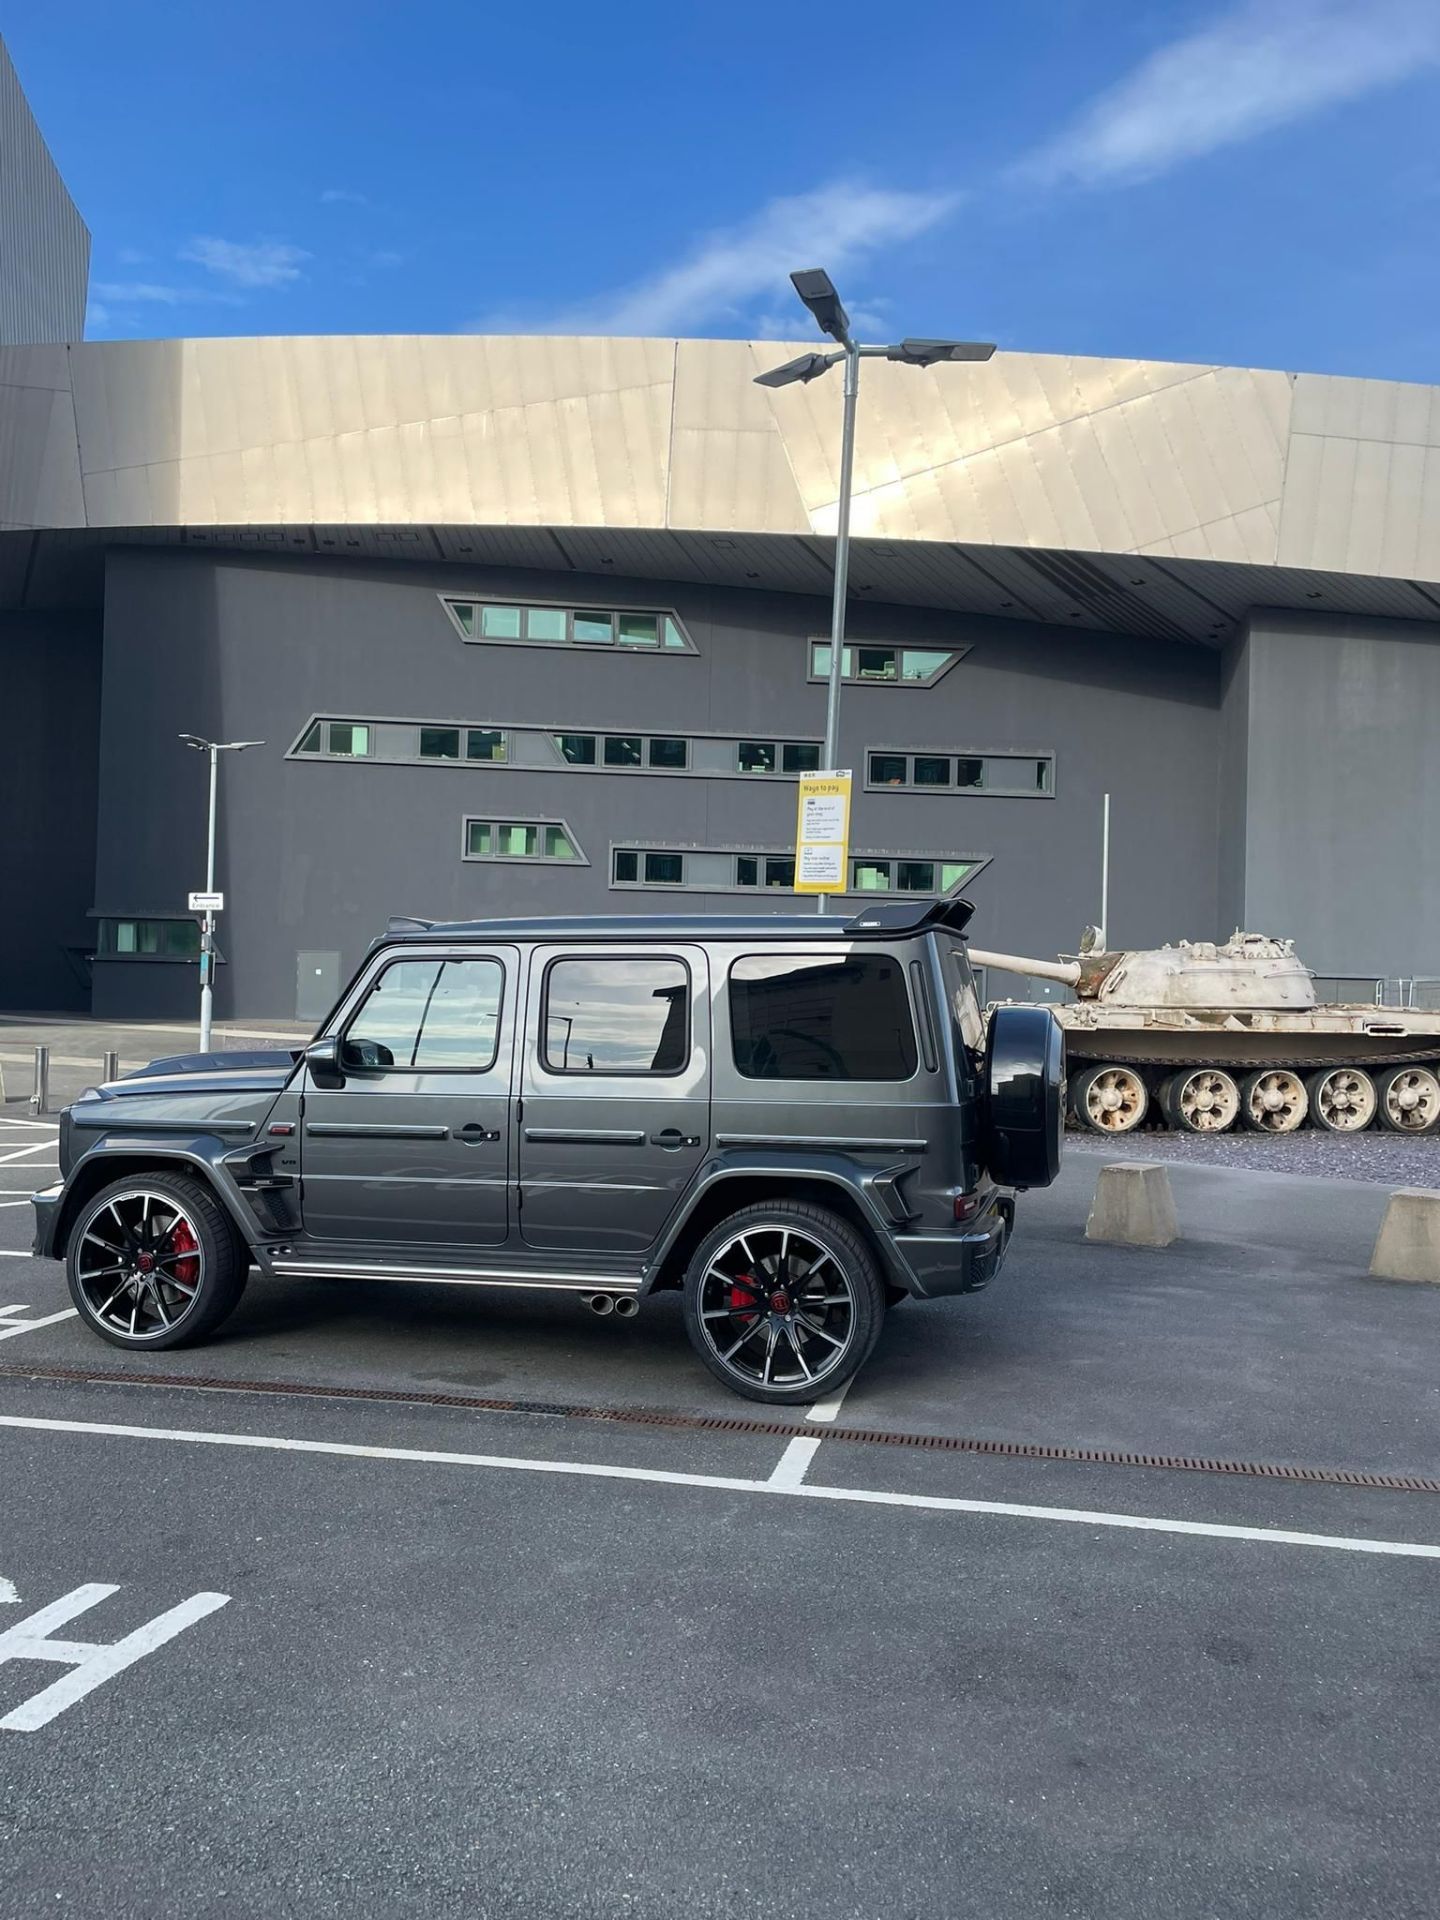 MERCEDES G63 BRABUS WIDE-STAR 800 STYLING GREY WITH BLACK LEATHER INTERIOR - Image 5 of 23